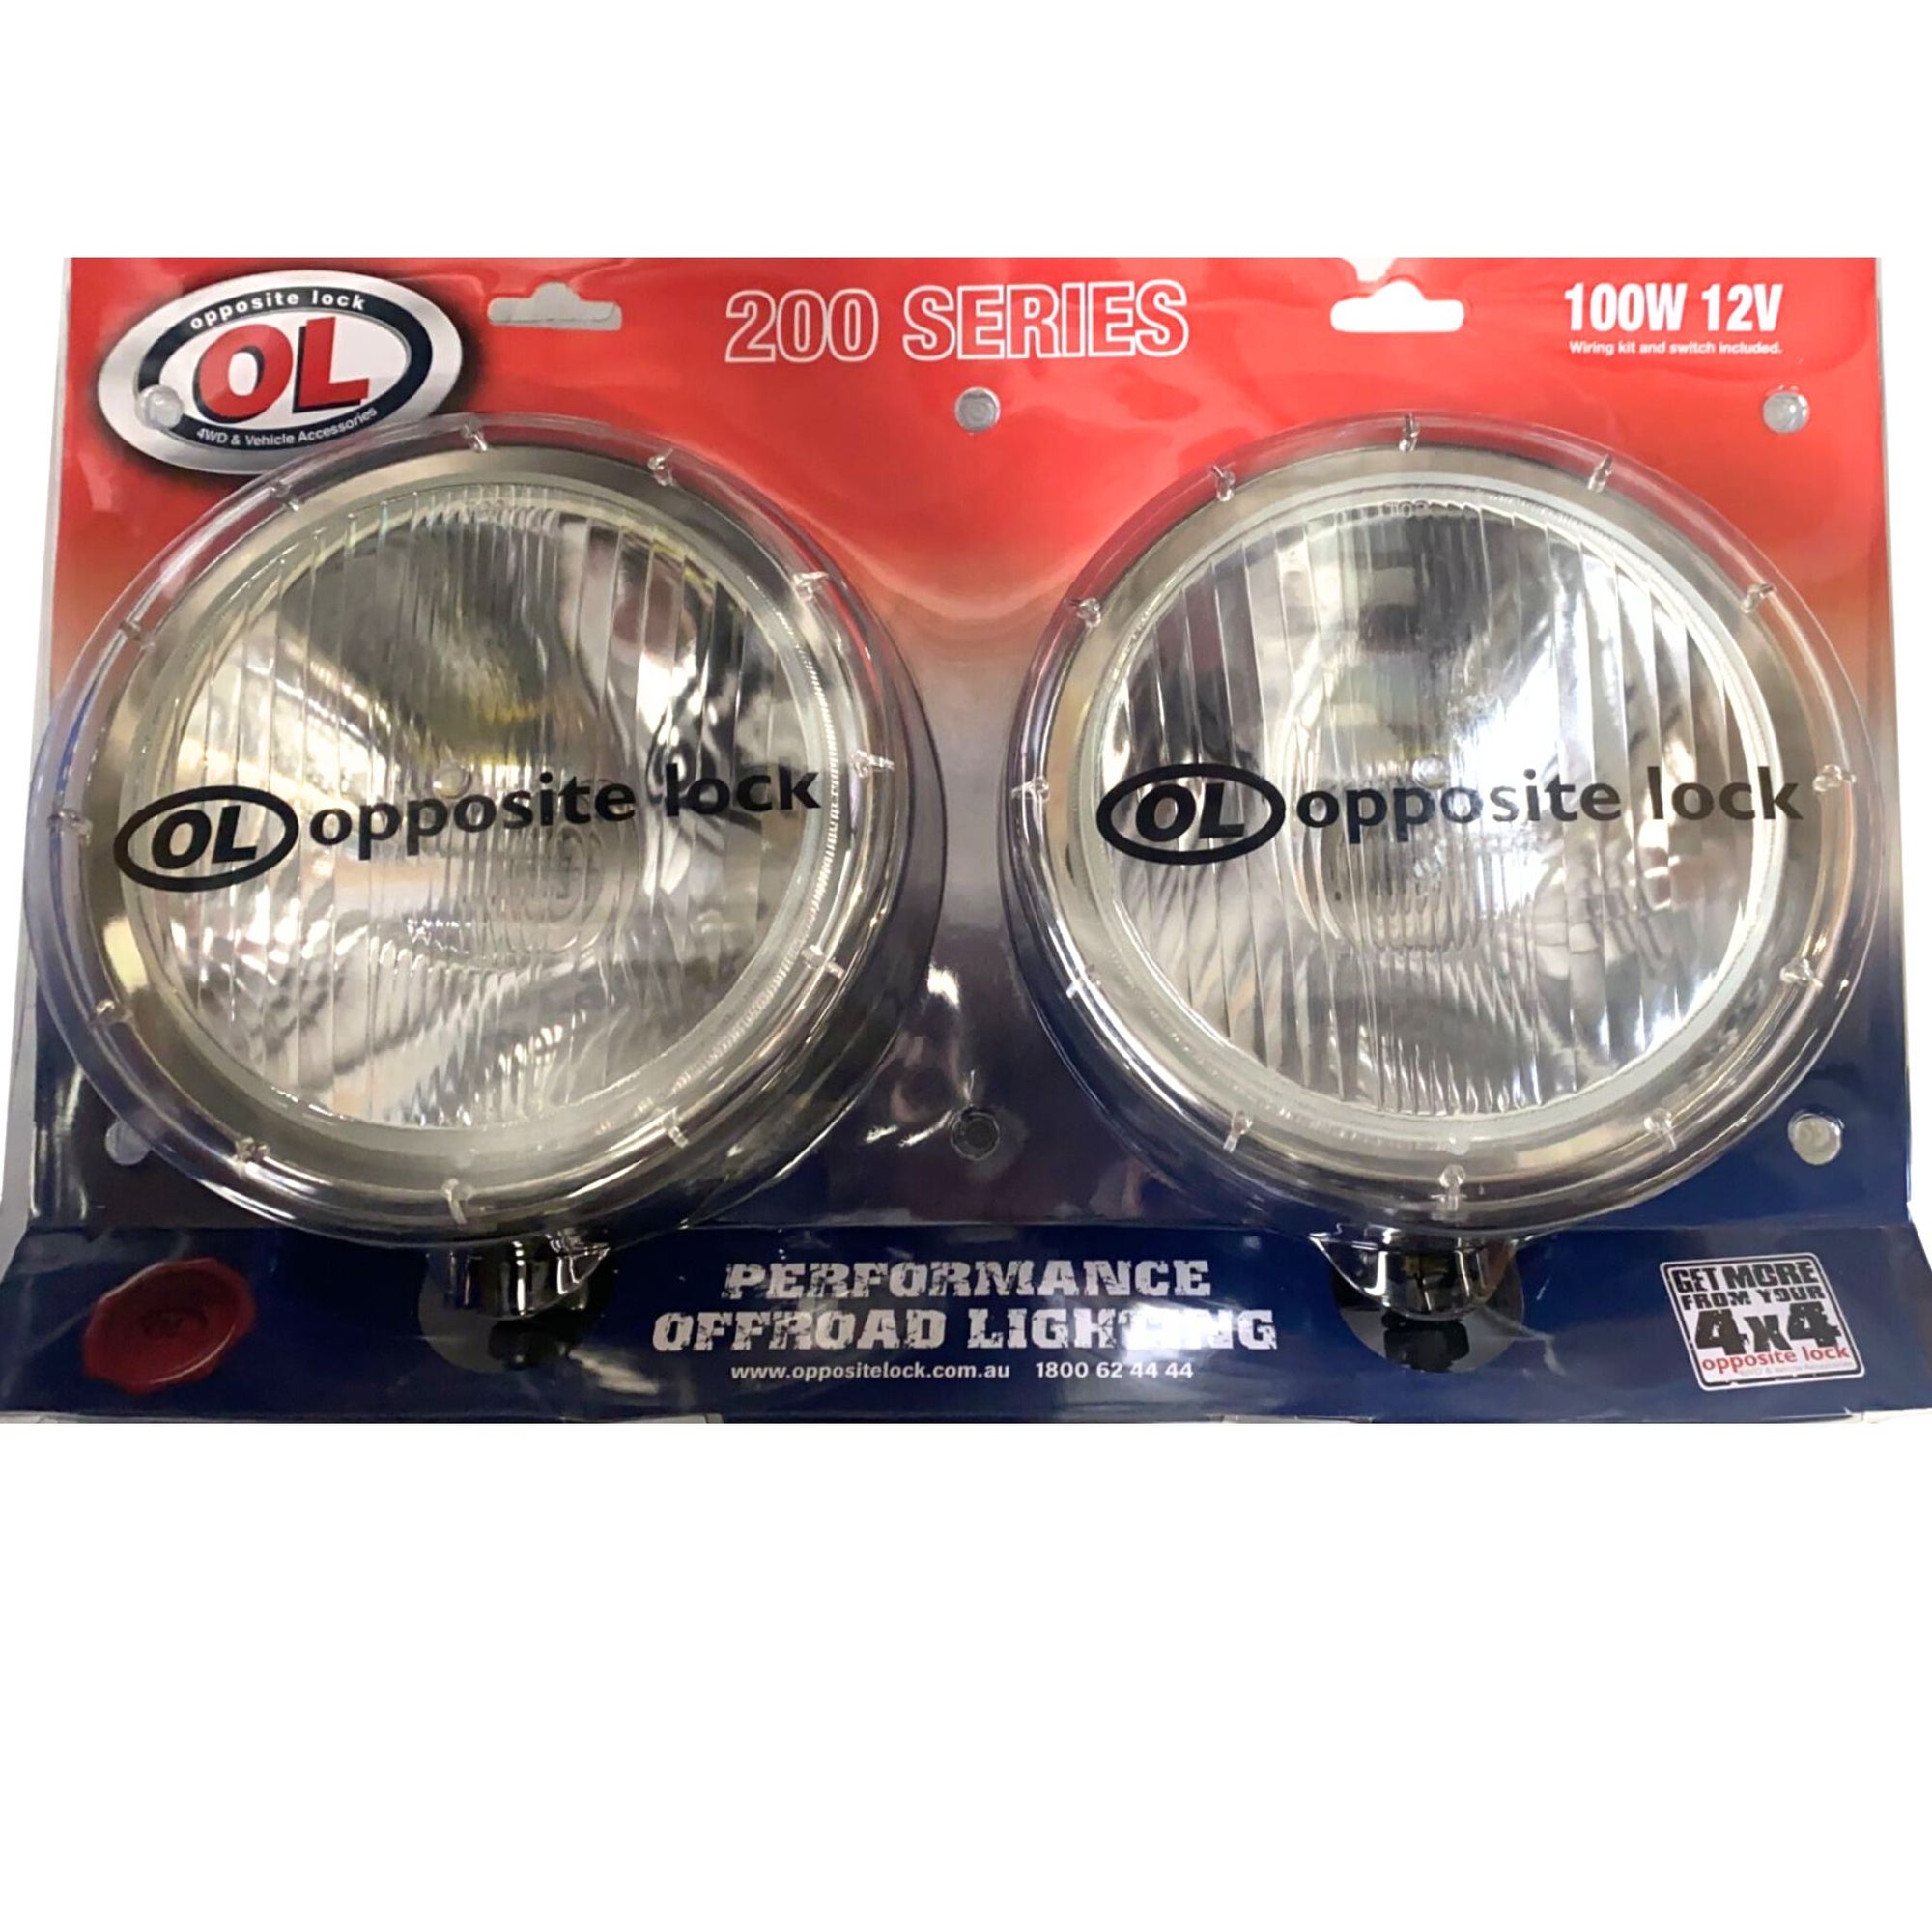 Twin Pack Opposite Lock 200 Series | 100W 12V Driving Light Set - South East Clearance Centre